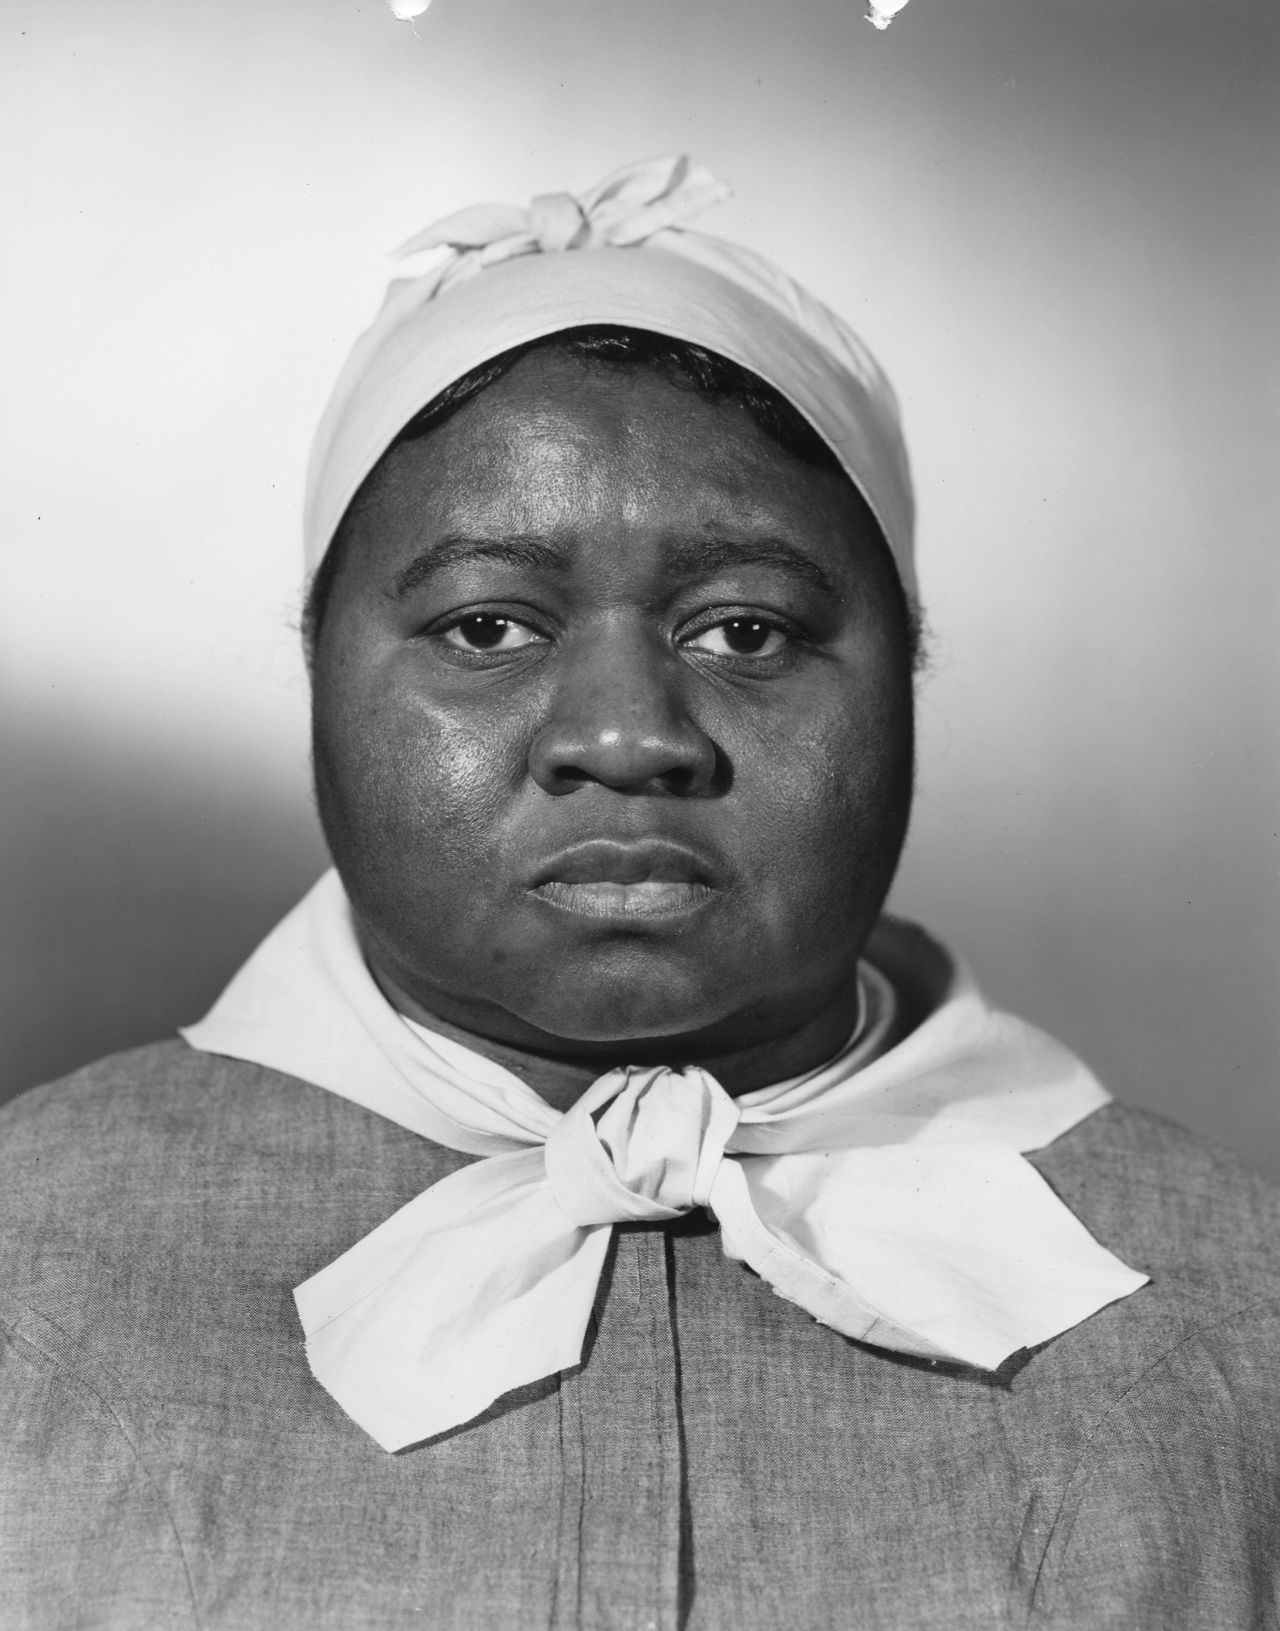 Hattie McDaniel received the best supporting actress Oscar for her role as Mammy, becoming the first African-American to win an Academy Award. "She brought something to the performance that really stood out,"  says Steve Wilson, the exhibition curator. However, segregation in the South prevented the actress from attending the movie's December 1939 premiere in Atlanta with other celebrities.